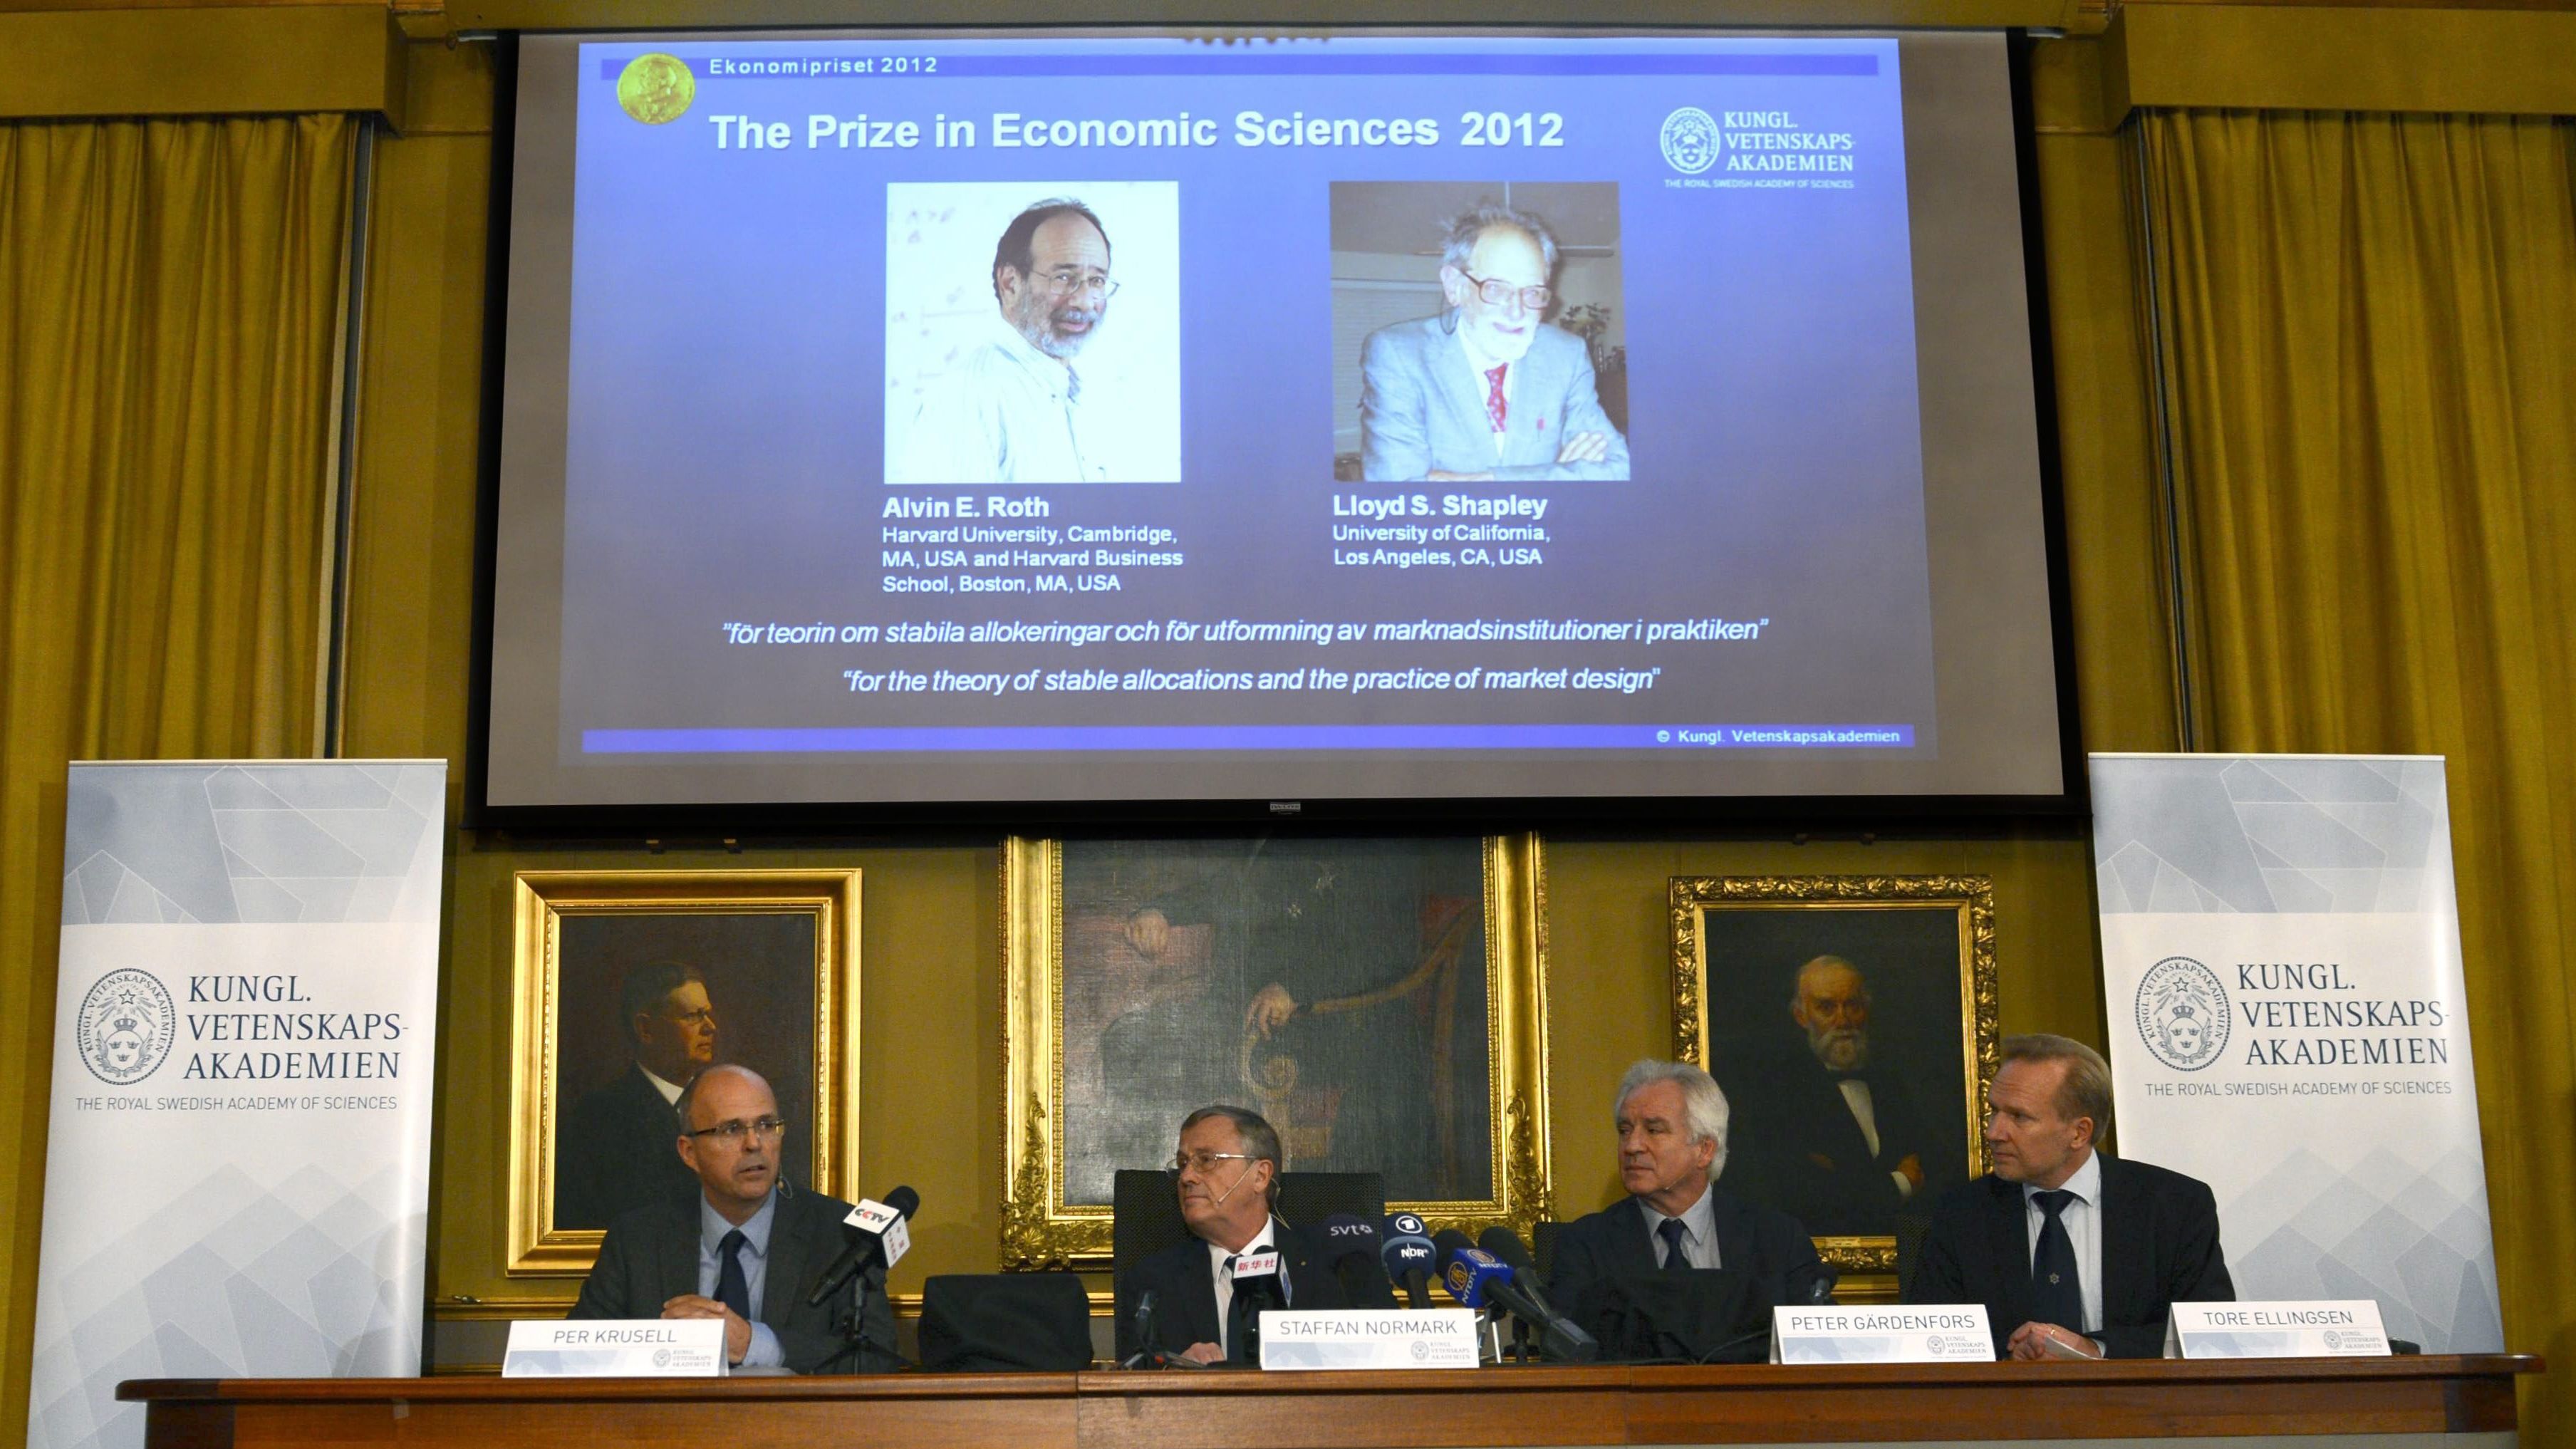 The Swedish Royal Academy of Sciences present the winners of the Nobel Memorial Prize in Economic Sciences.